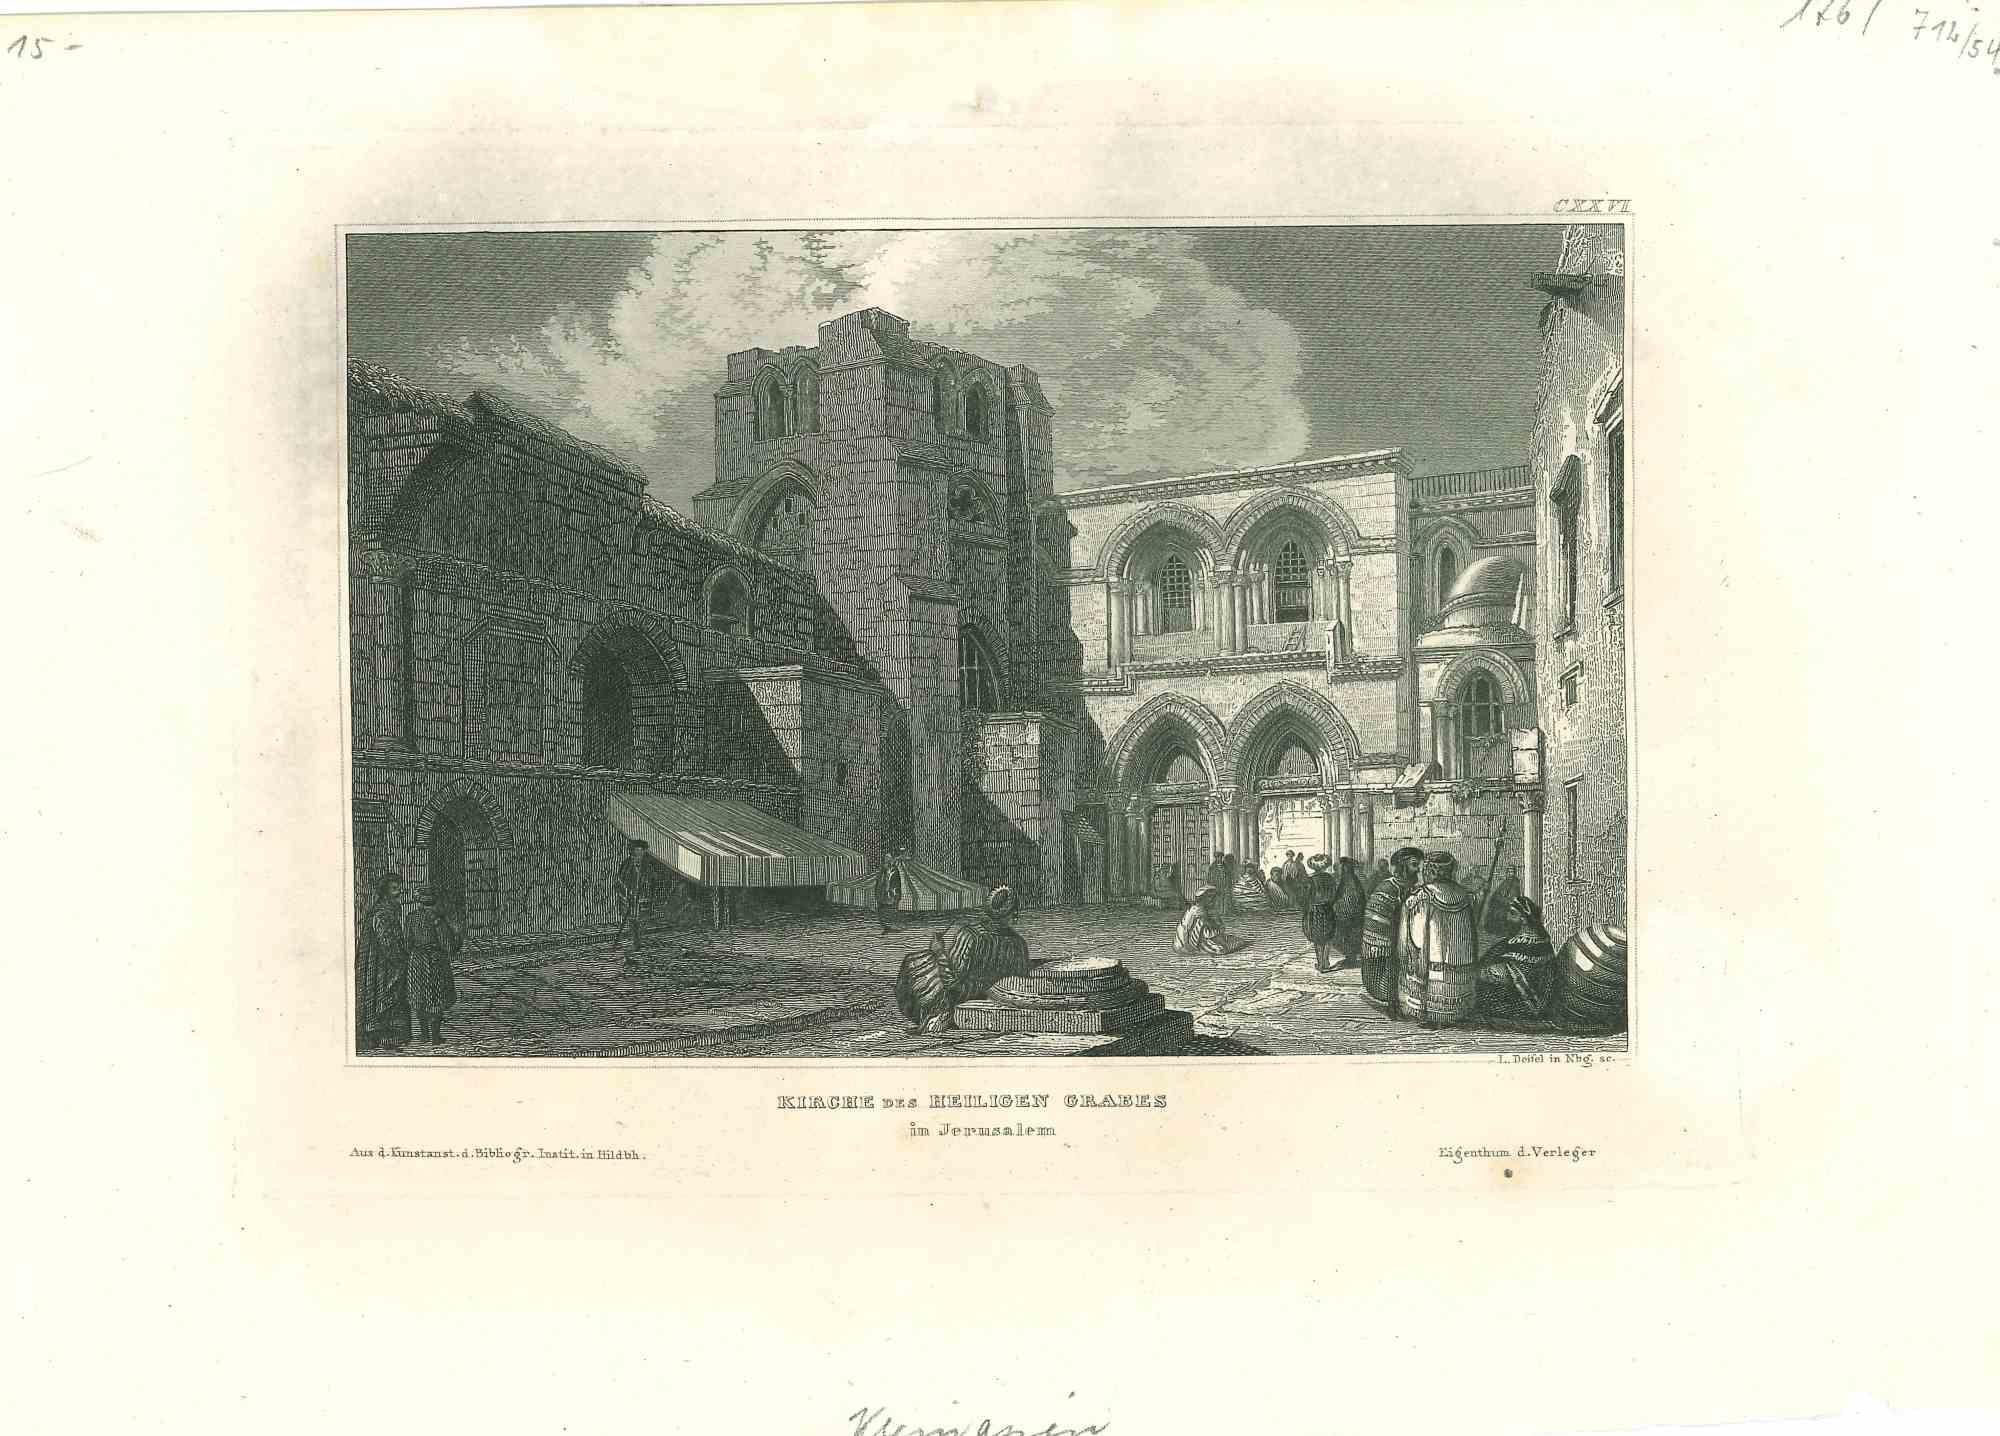 Unknown Figurative Print - The Church of the Holy Grave - Original Lithograph - Mid-19th Century